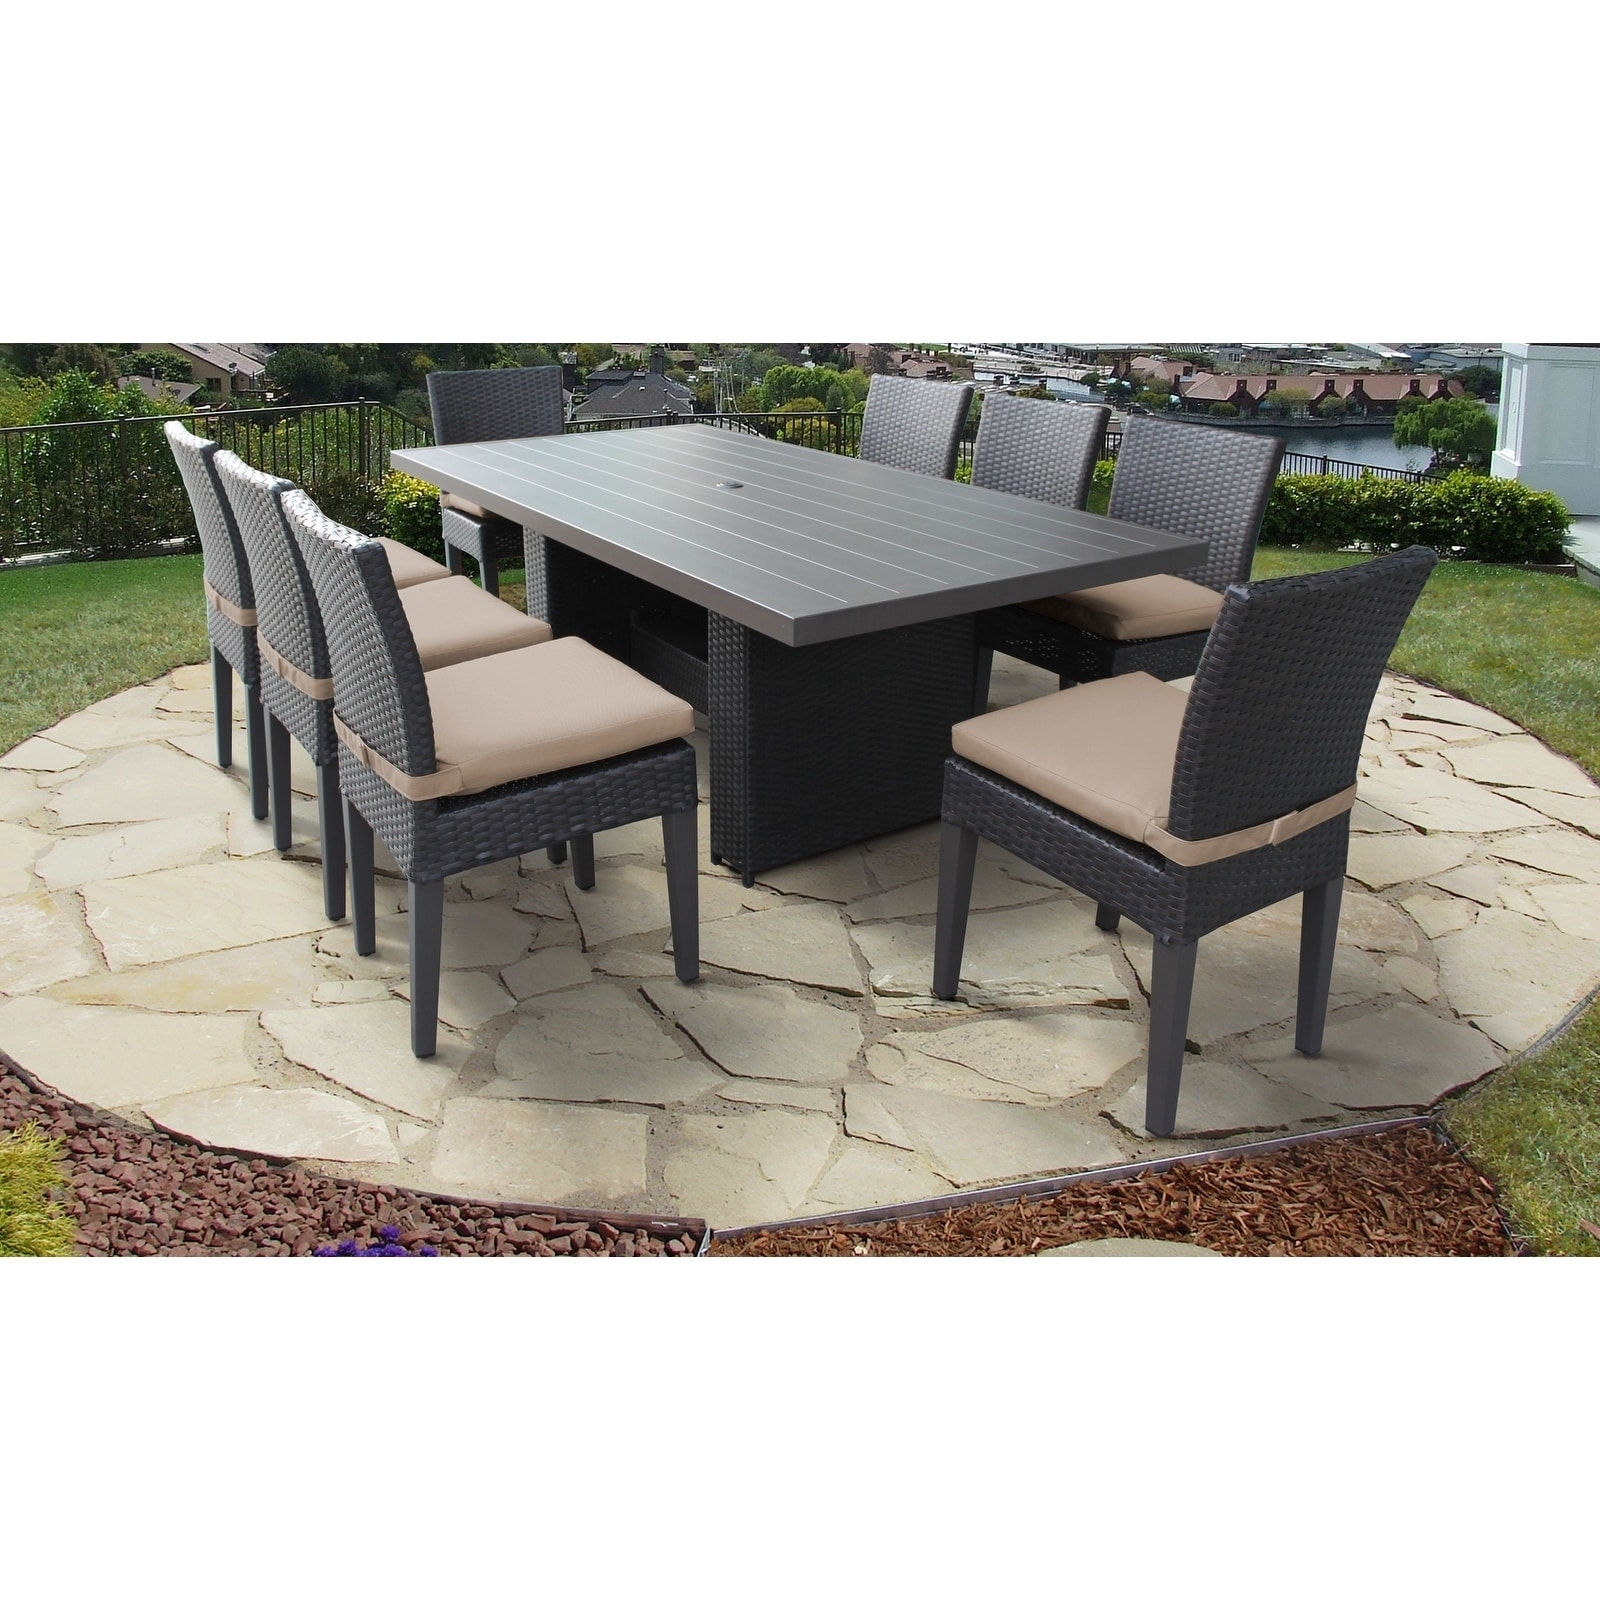 Belle Rectangular Outdoor Patio Dining Table With 8 Armless Chairs